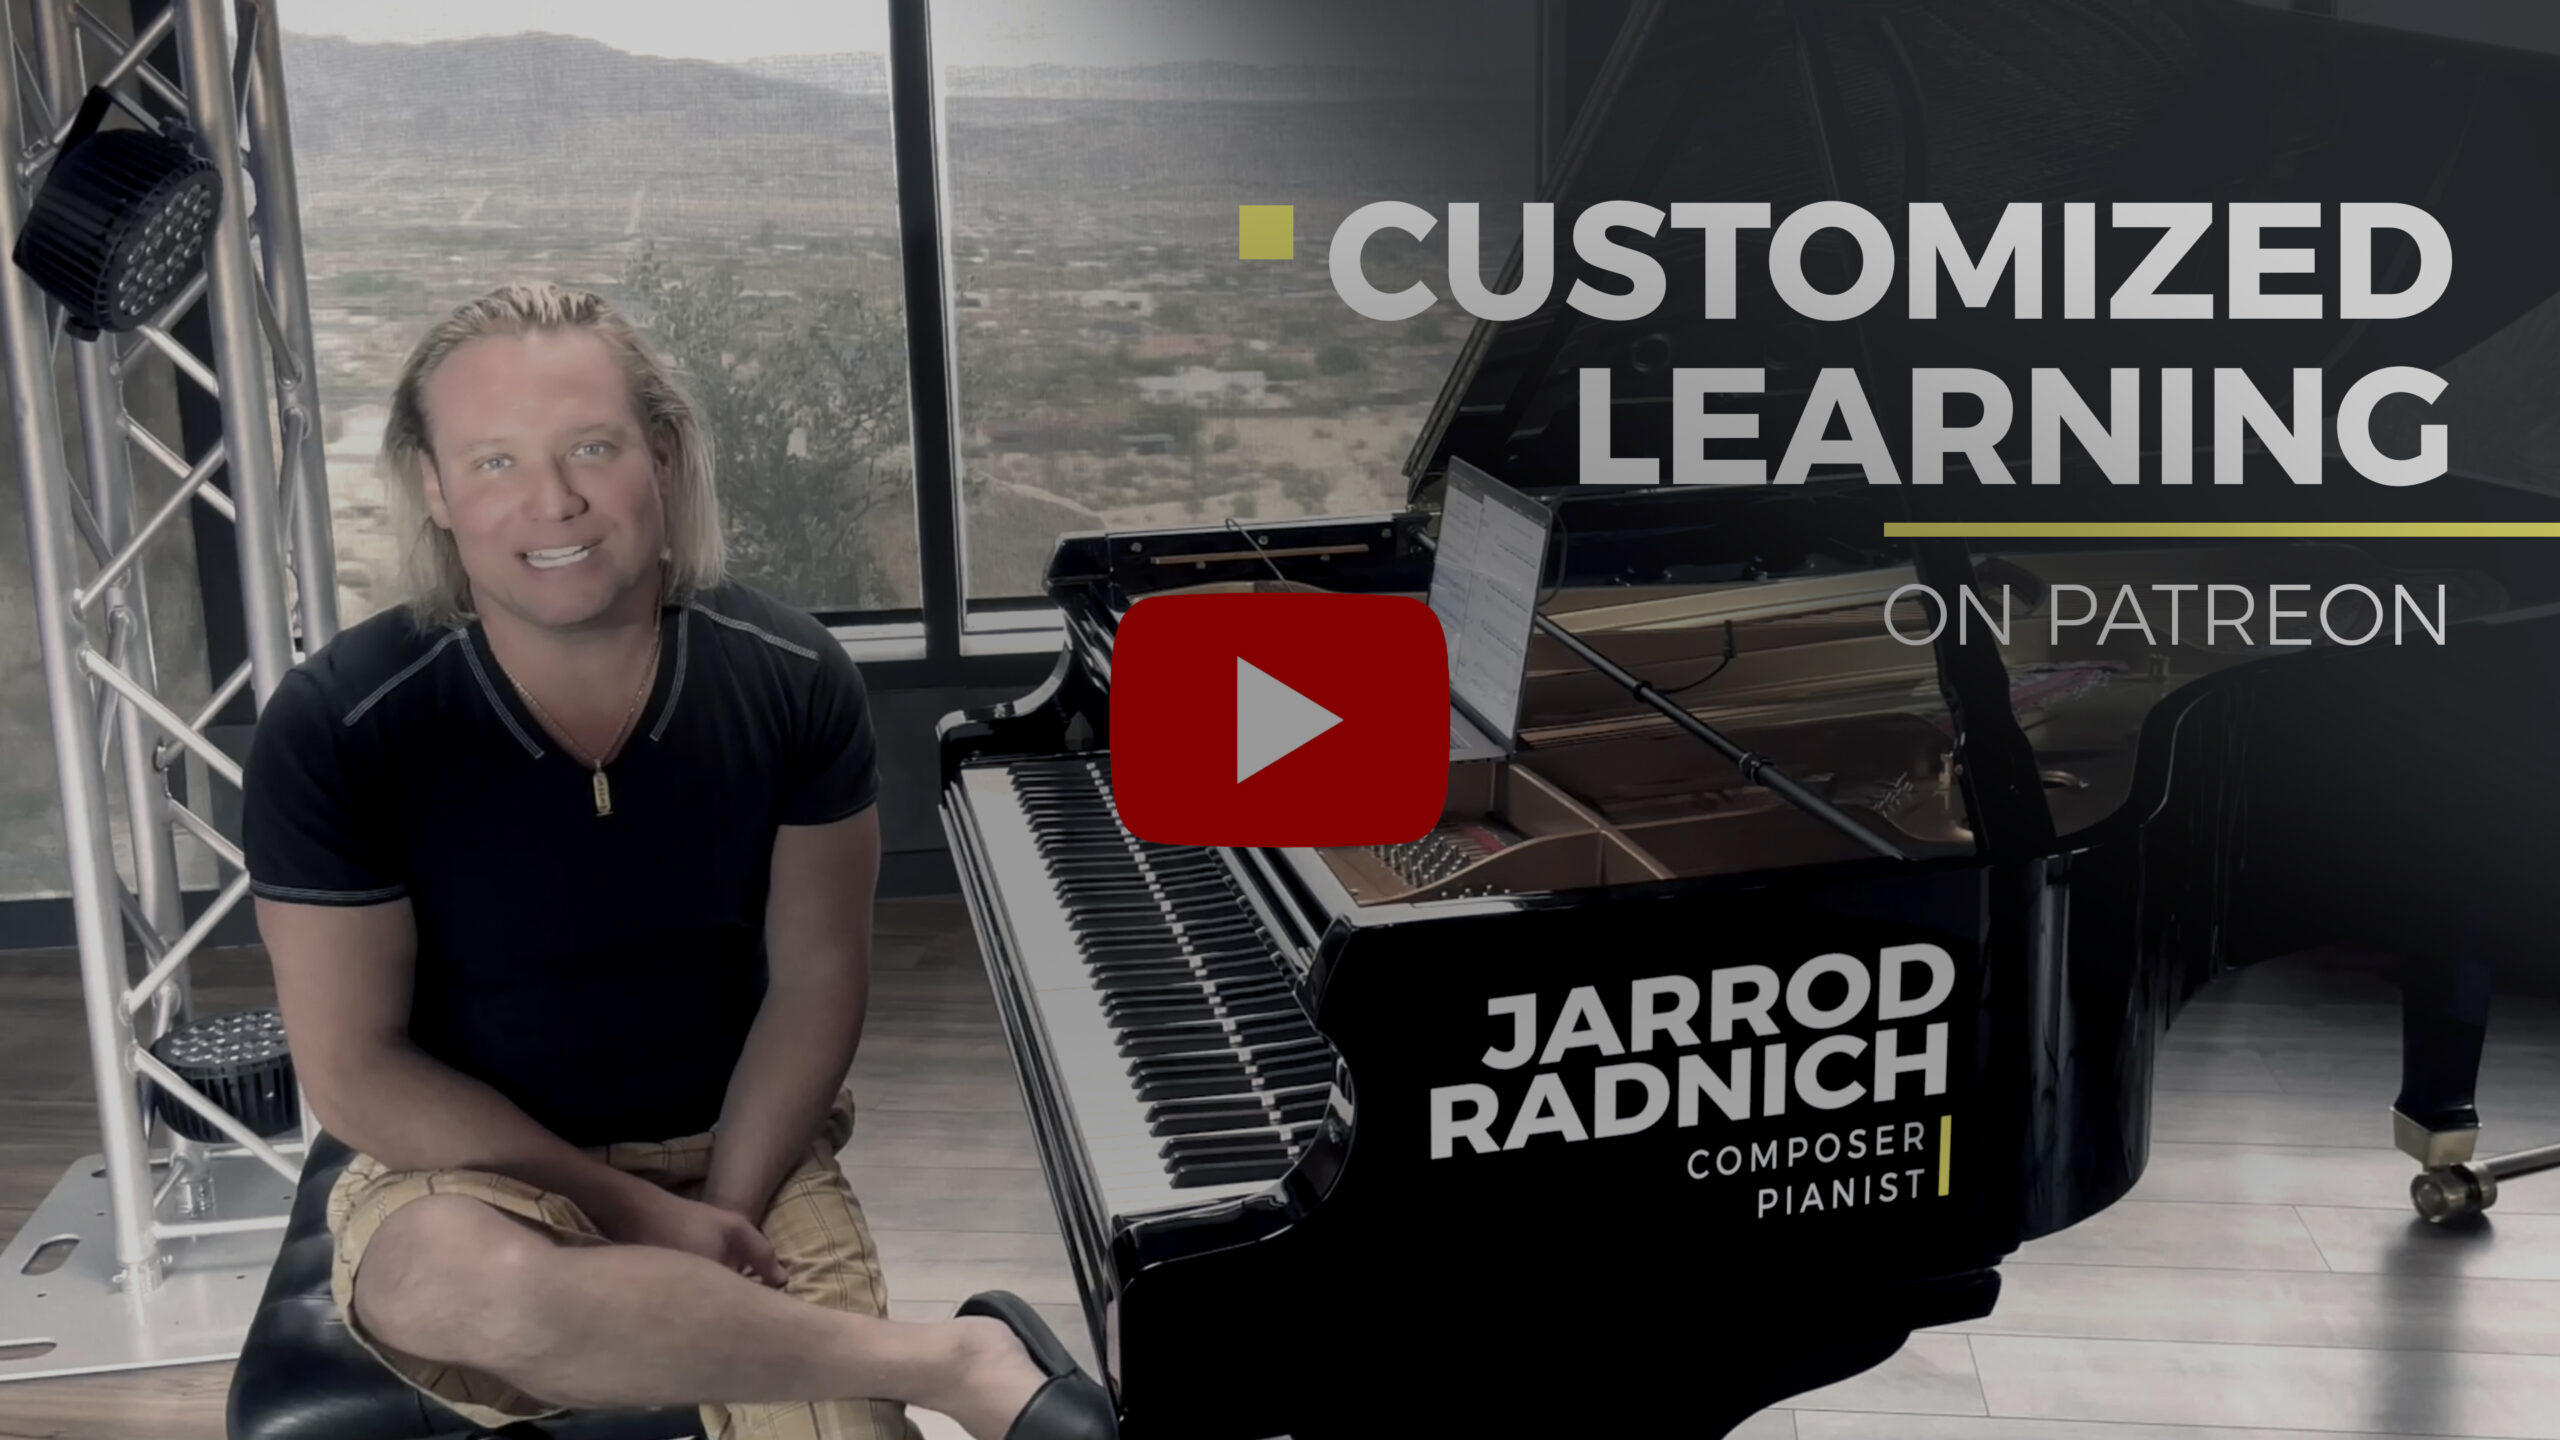 Jarrod Radnich launches NEW Patreon Channel for Piano/Music Education